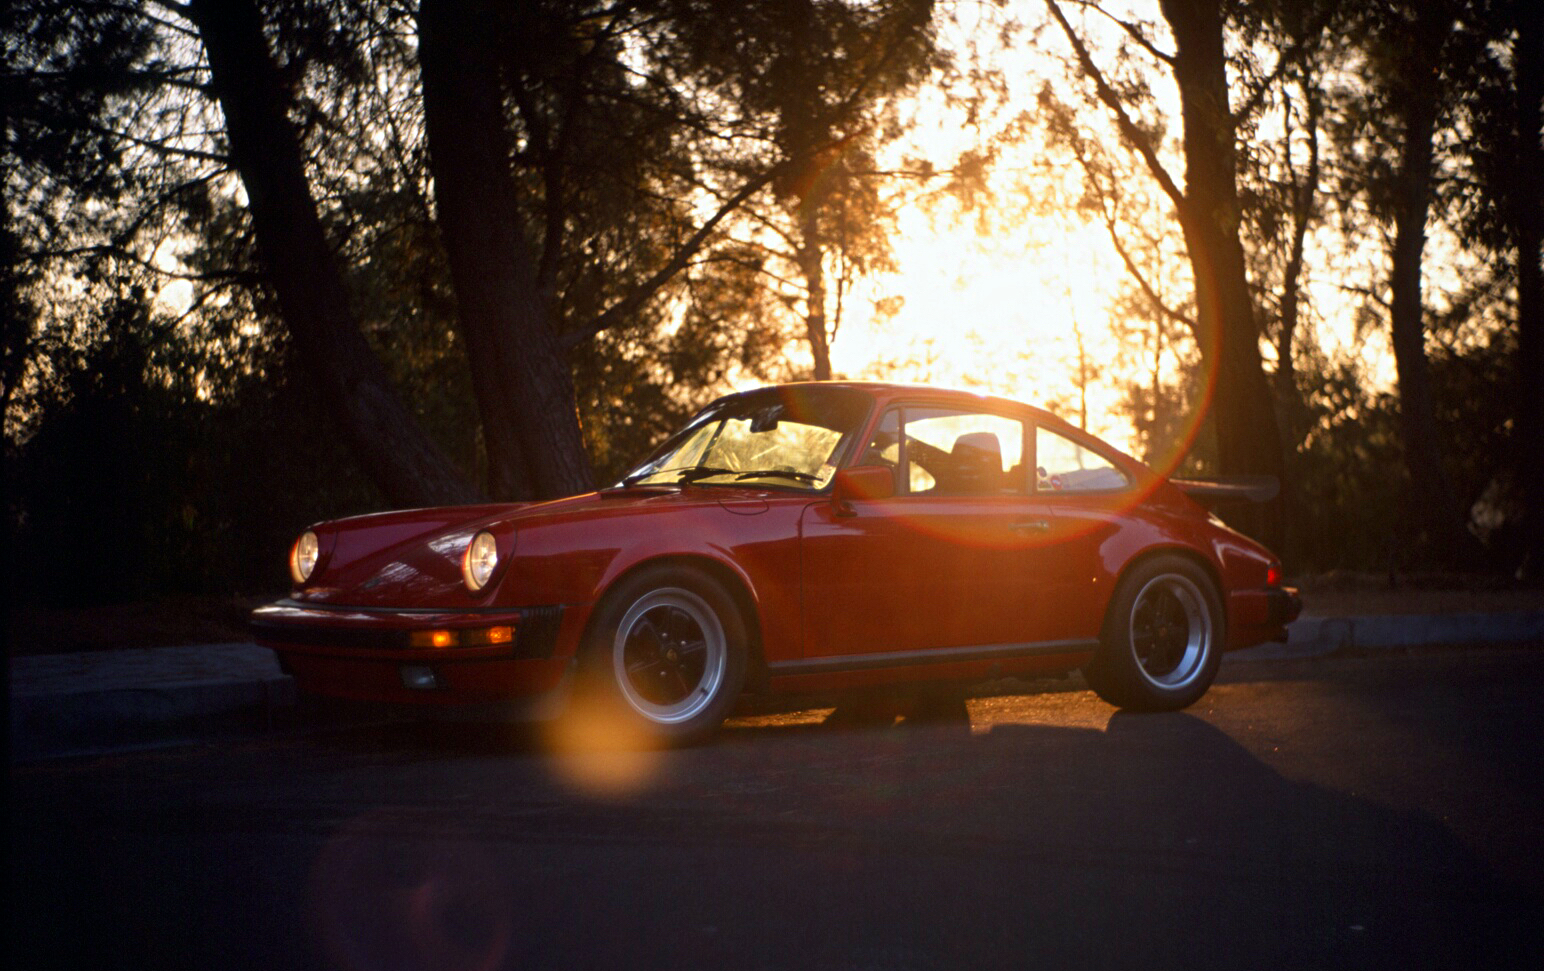  1985 Carrera - Guards Red 